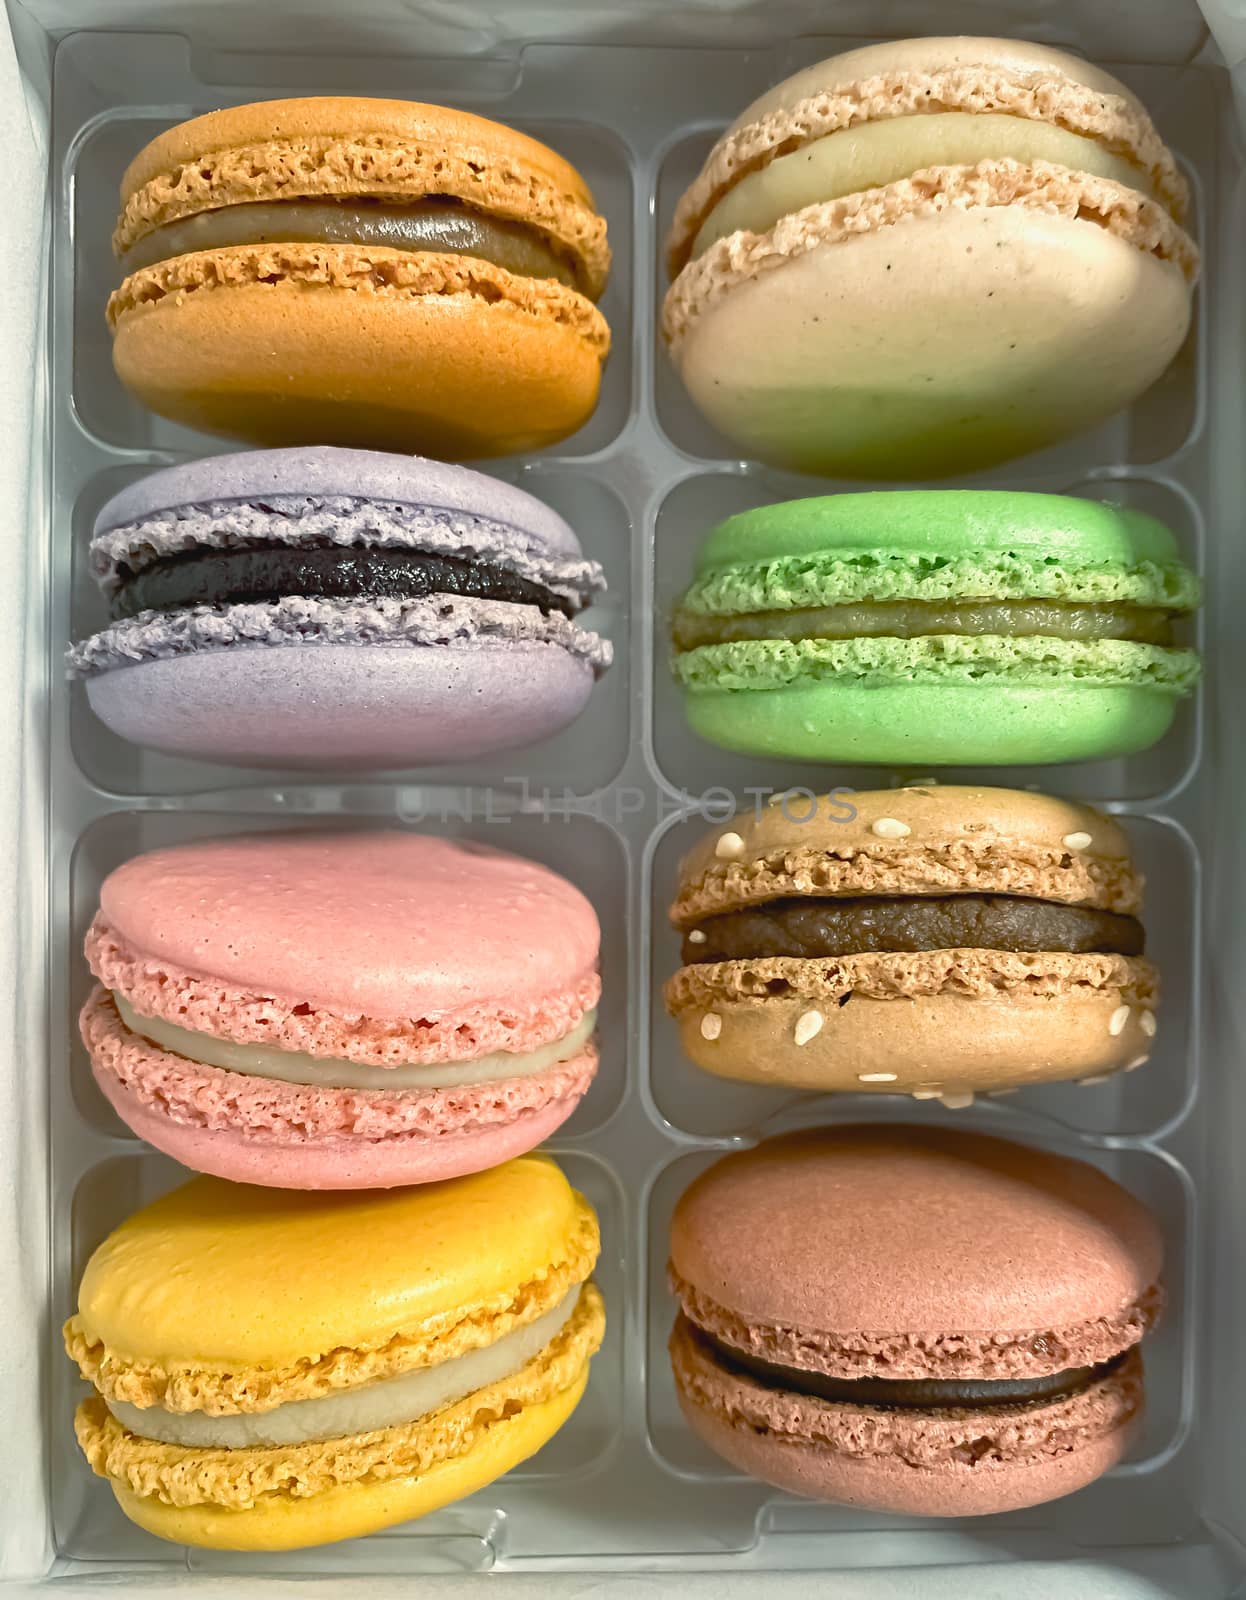 a group of colorful macarons stacked in a plastic package by rarrarorro